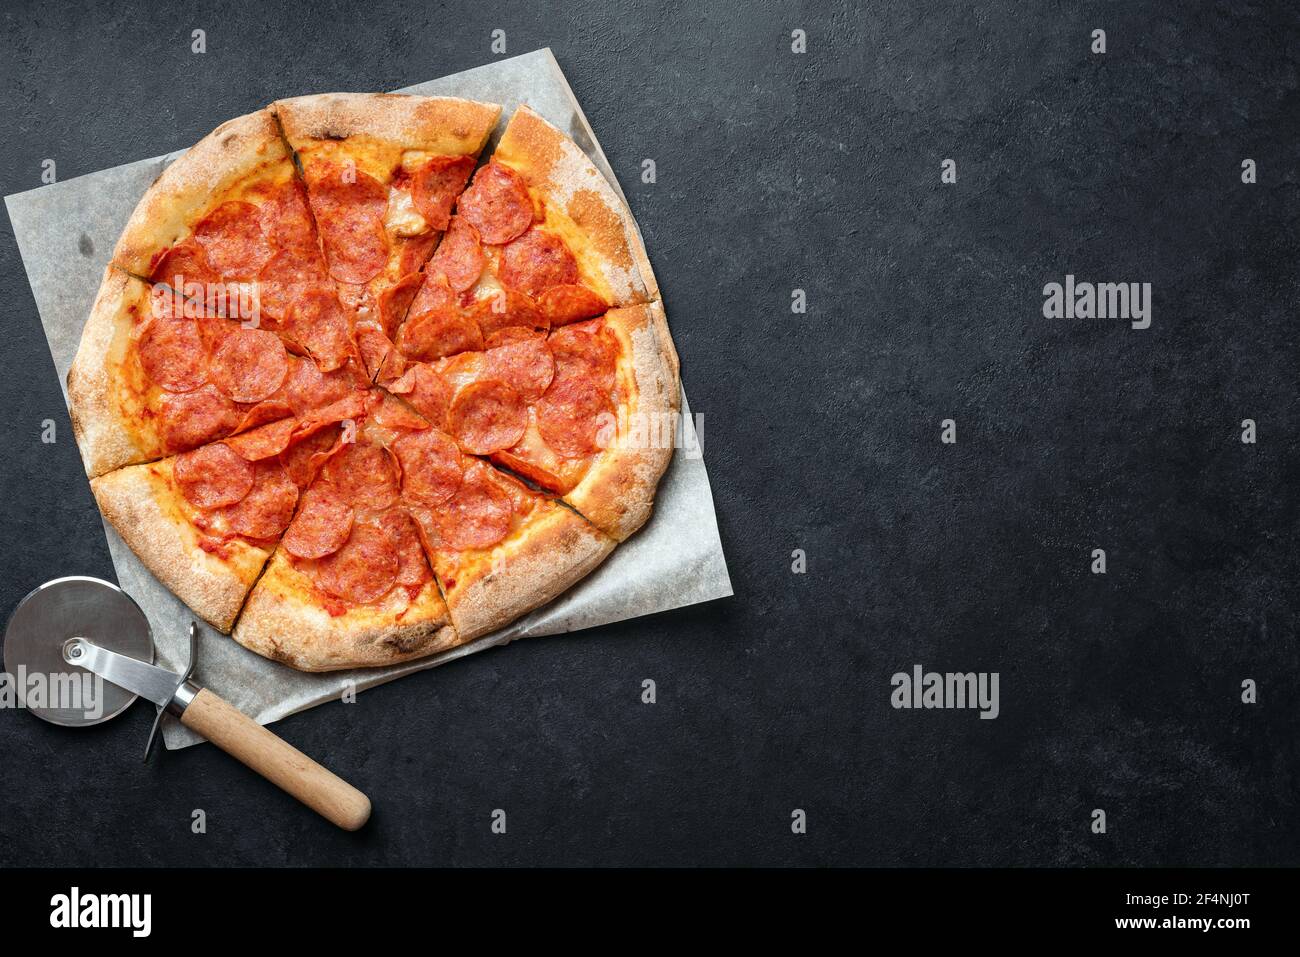 Tasty pepperoni pizza on black stone background. Pizza pepperoni cut into slices. Top view copy space for ad text or design Stock Photo